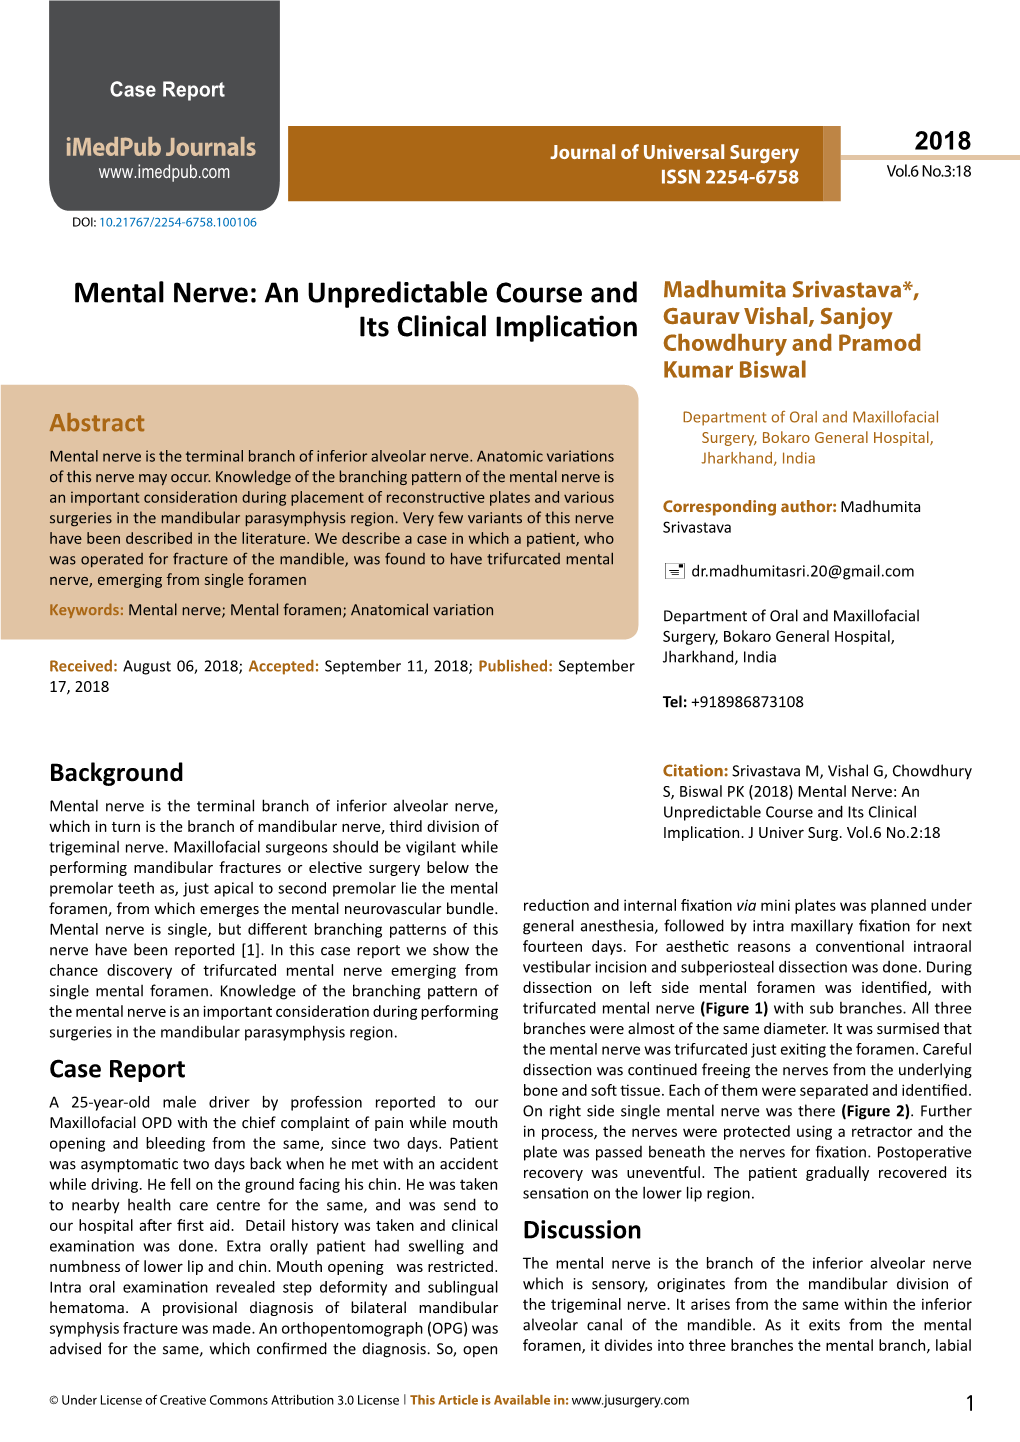 Mental Nerve: an Unpredictable Course and Its Clinical Implication